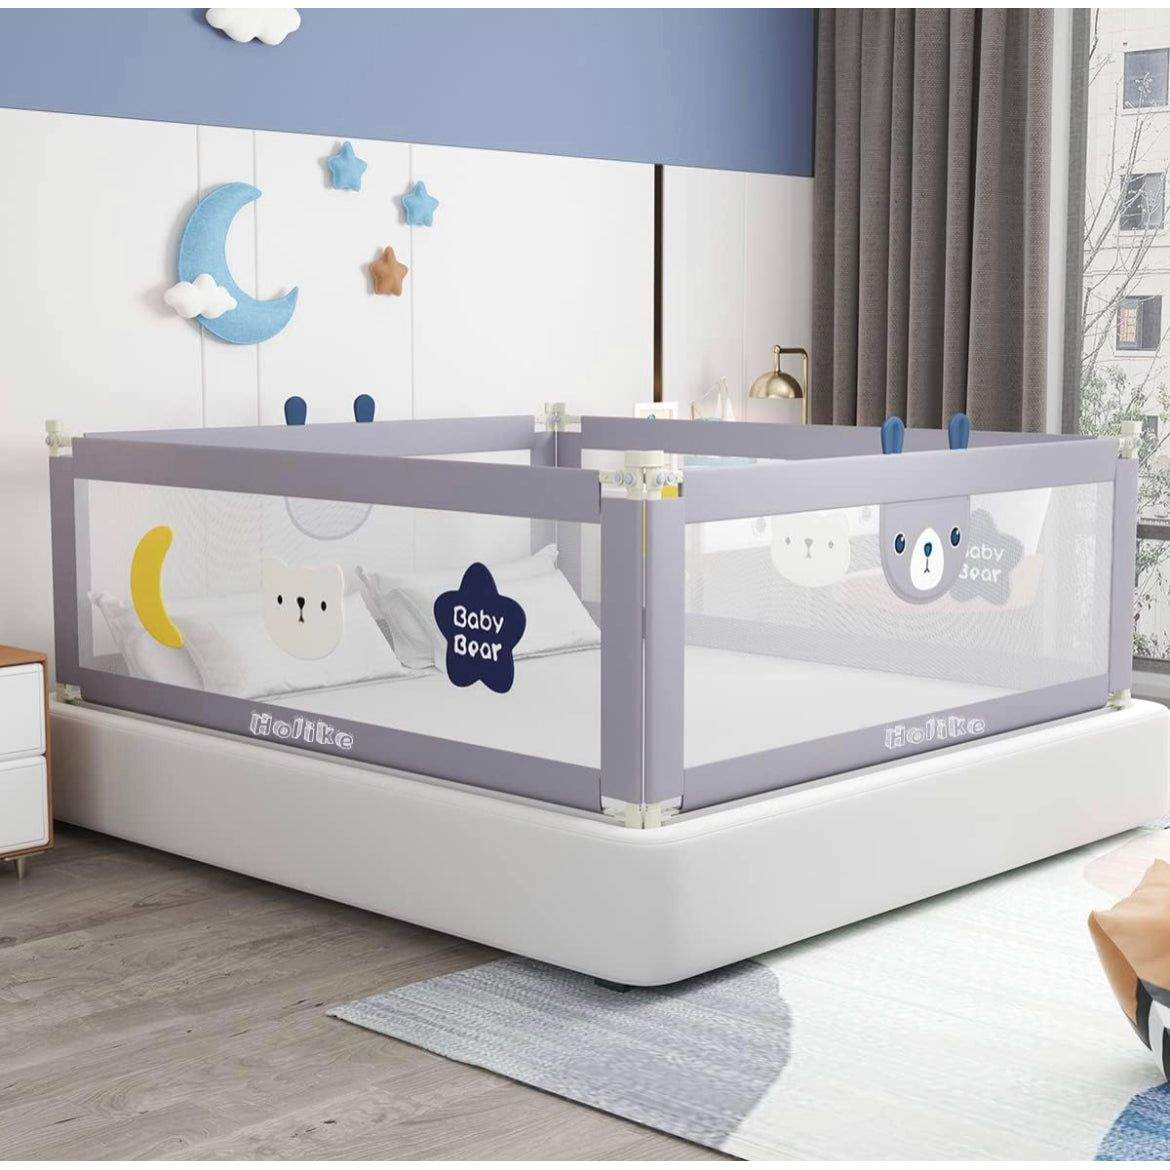 HOLIKE Bed Rails for Toddlers - 60" 70" 80" Extra Long Baby Bed Rail Guard (3 Sides: Perfect for Twin Bed, Include 3 Sides) - Selzalot